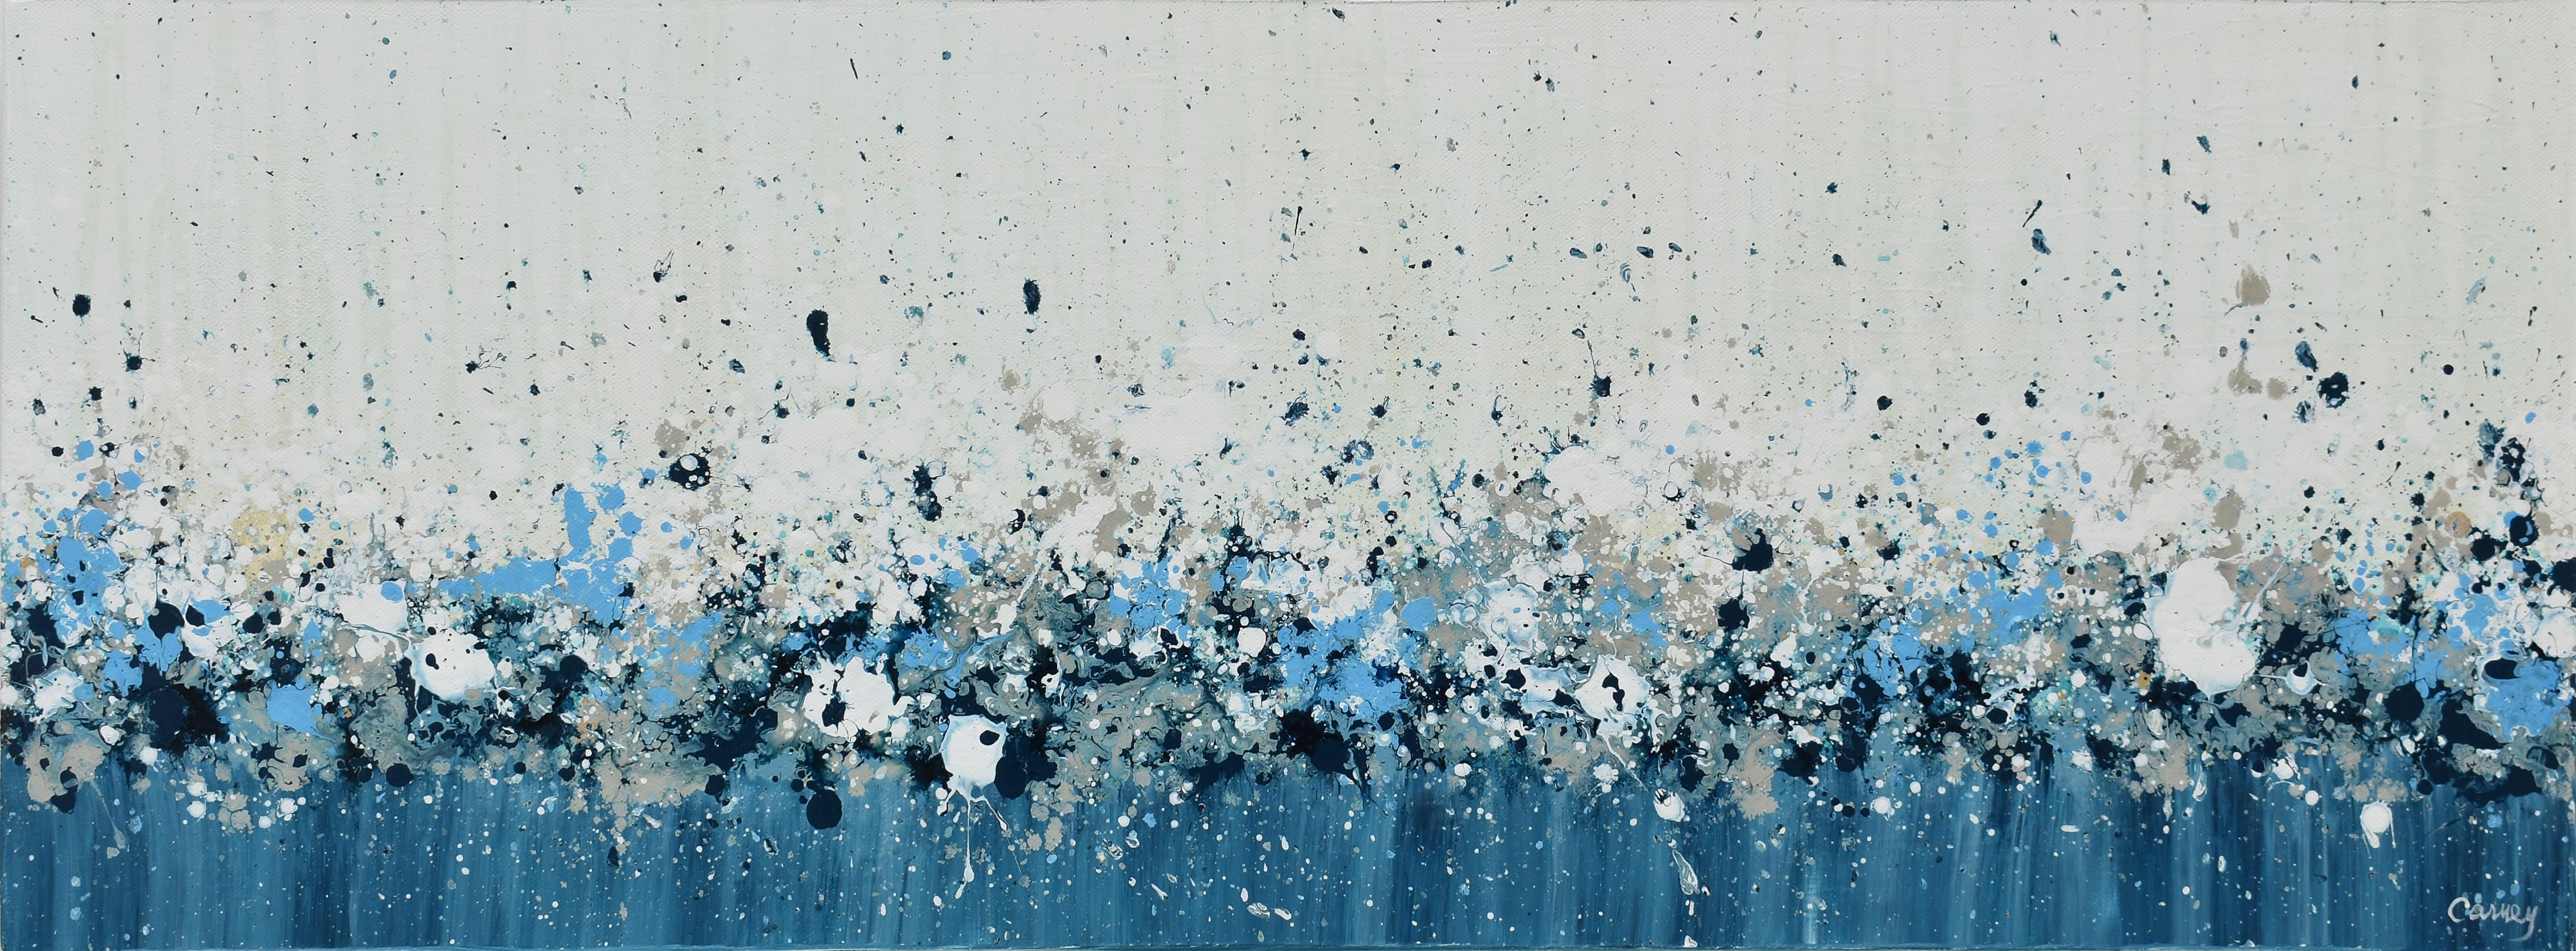 <p>Artist Comments<br />A panoramic abstract garden scene by artist Lisa Carney. Utilizing shades of blue, gray, and white, Lisa employed drip and spatters techniques to suggest a wildflower-covered field. Part of Lisa's signature Geoflora